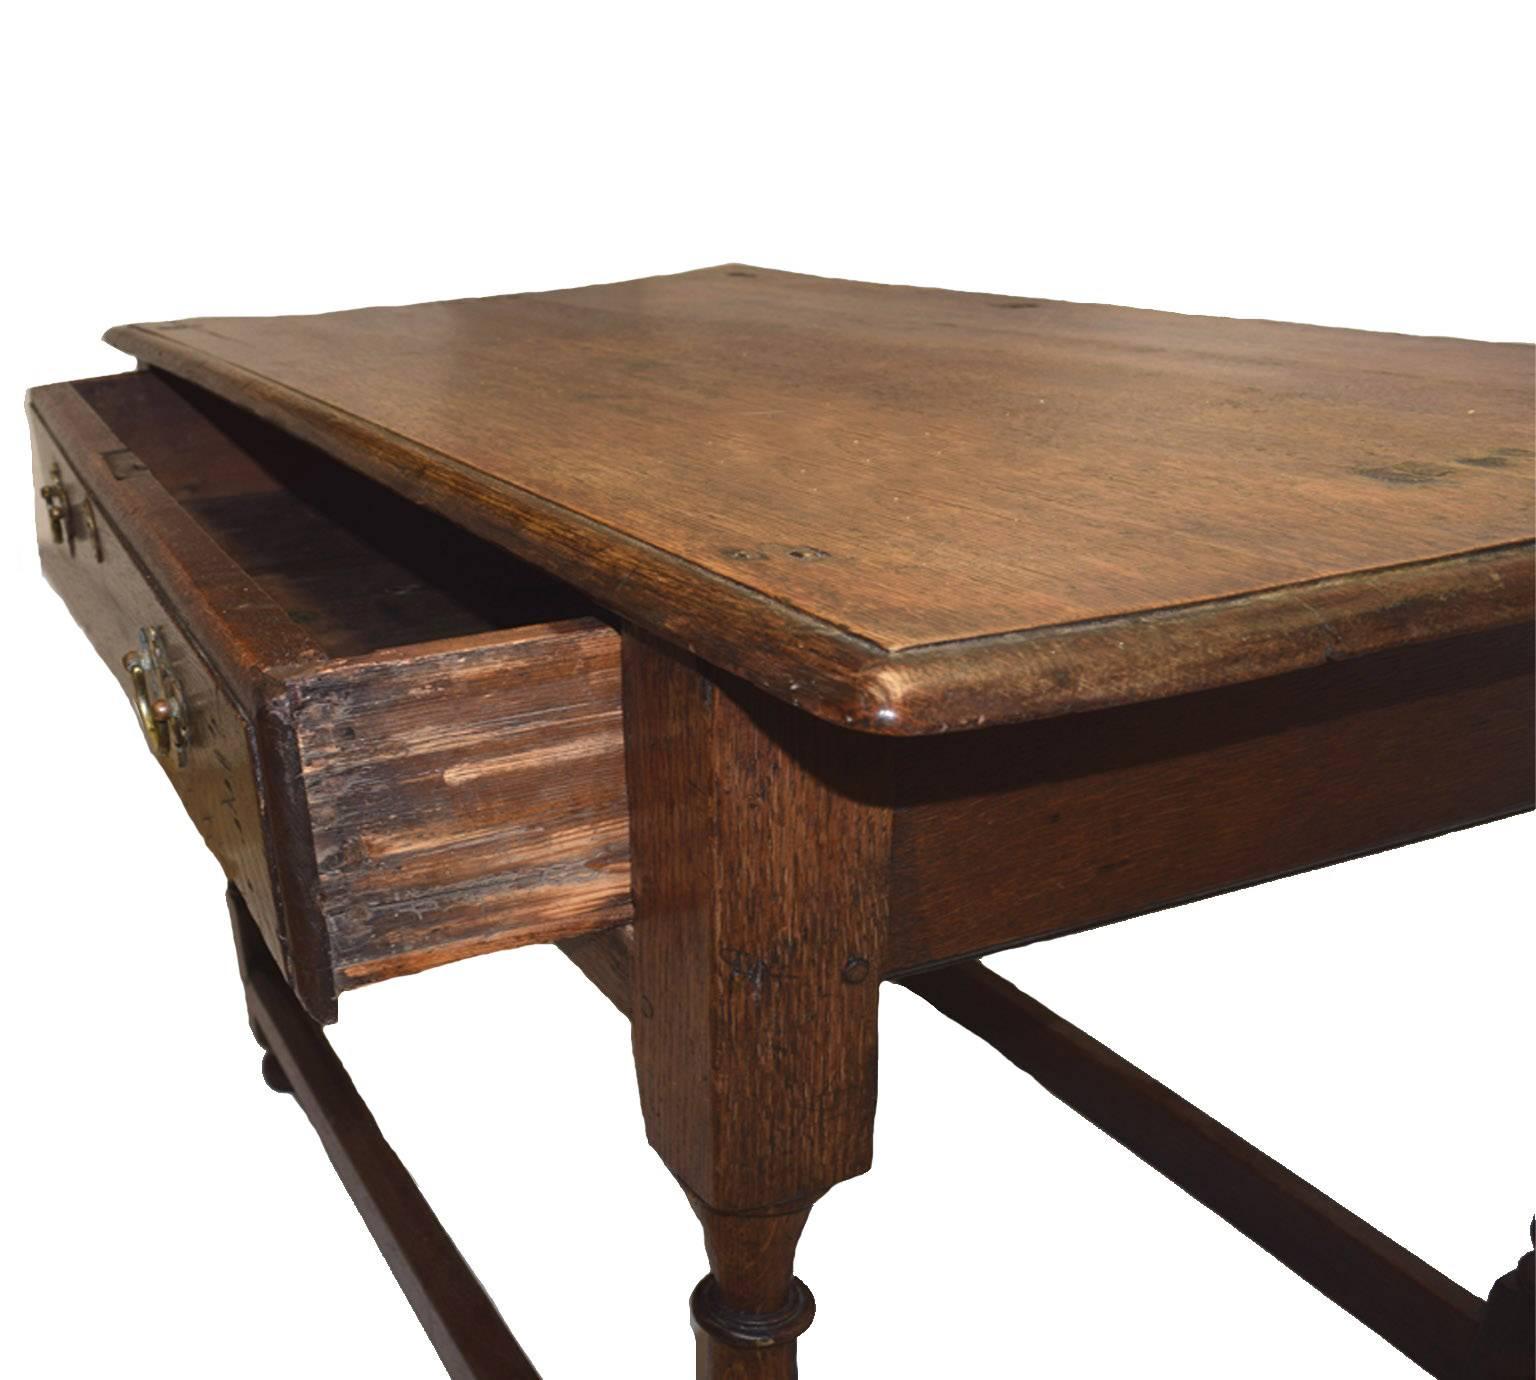 Antique William and Mary side table; with a plank top having an ogee rim, the apron having a single drawer, raised on four vasi-form turned and blocked legs united by four moulded cross stretchers, supported upon four bun feet, circa 1690.